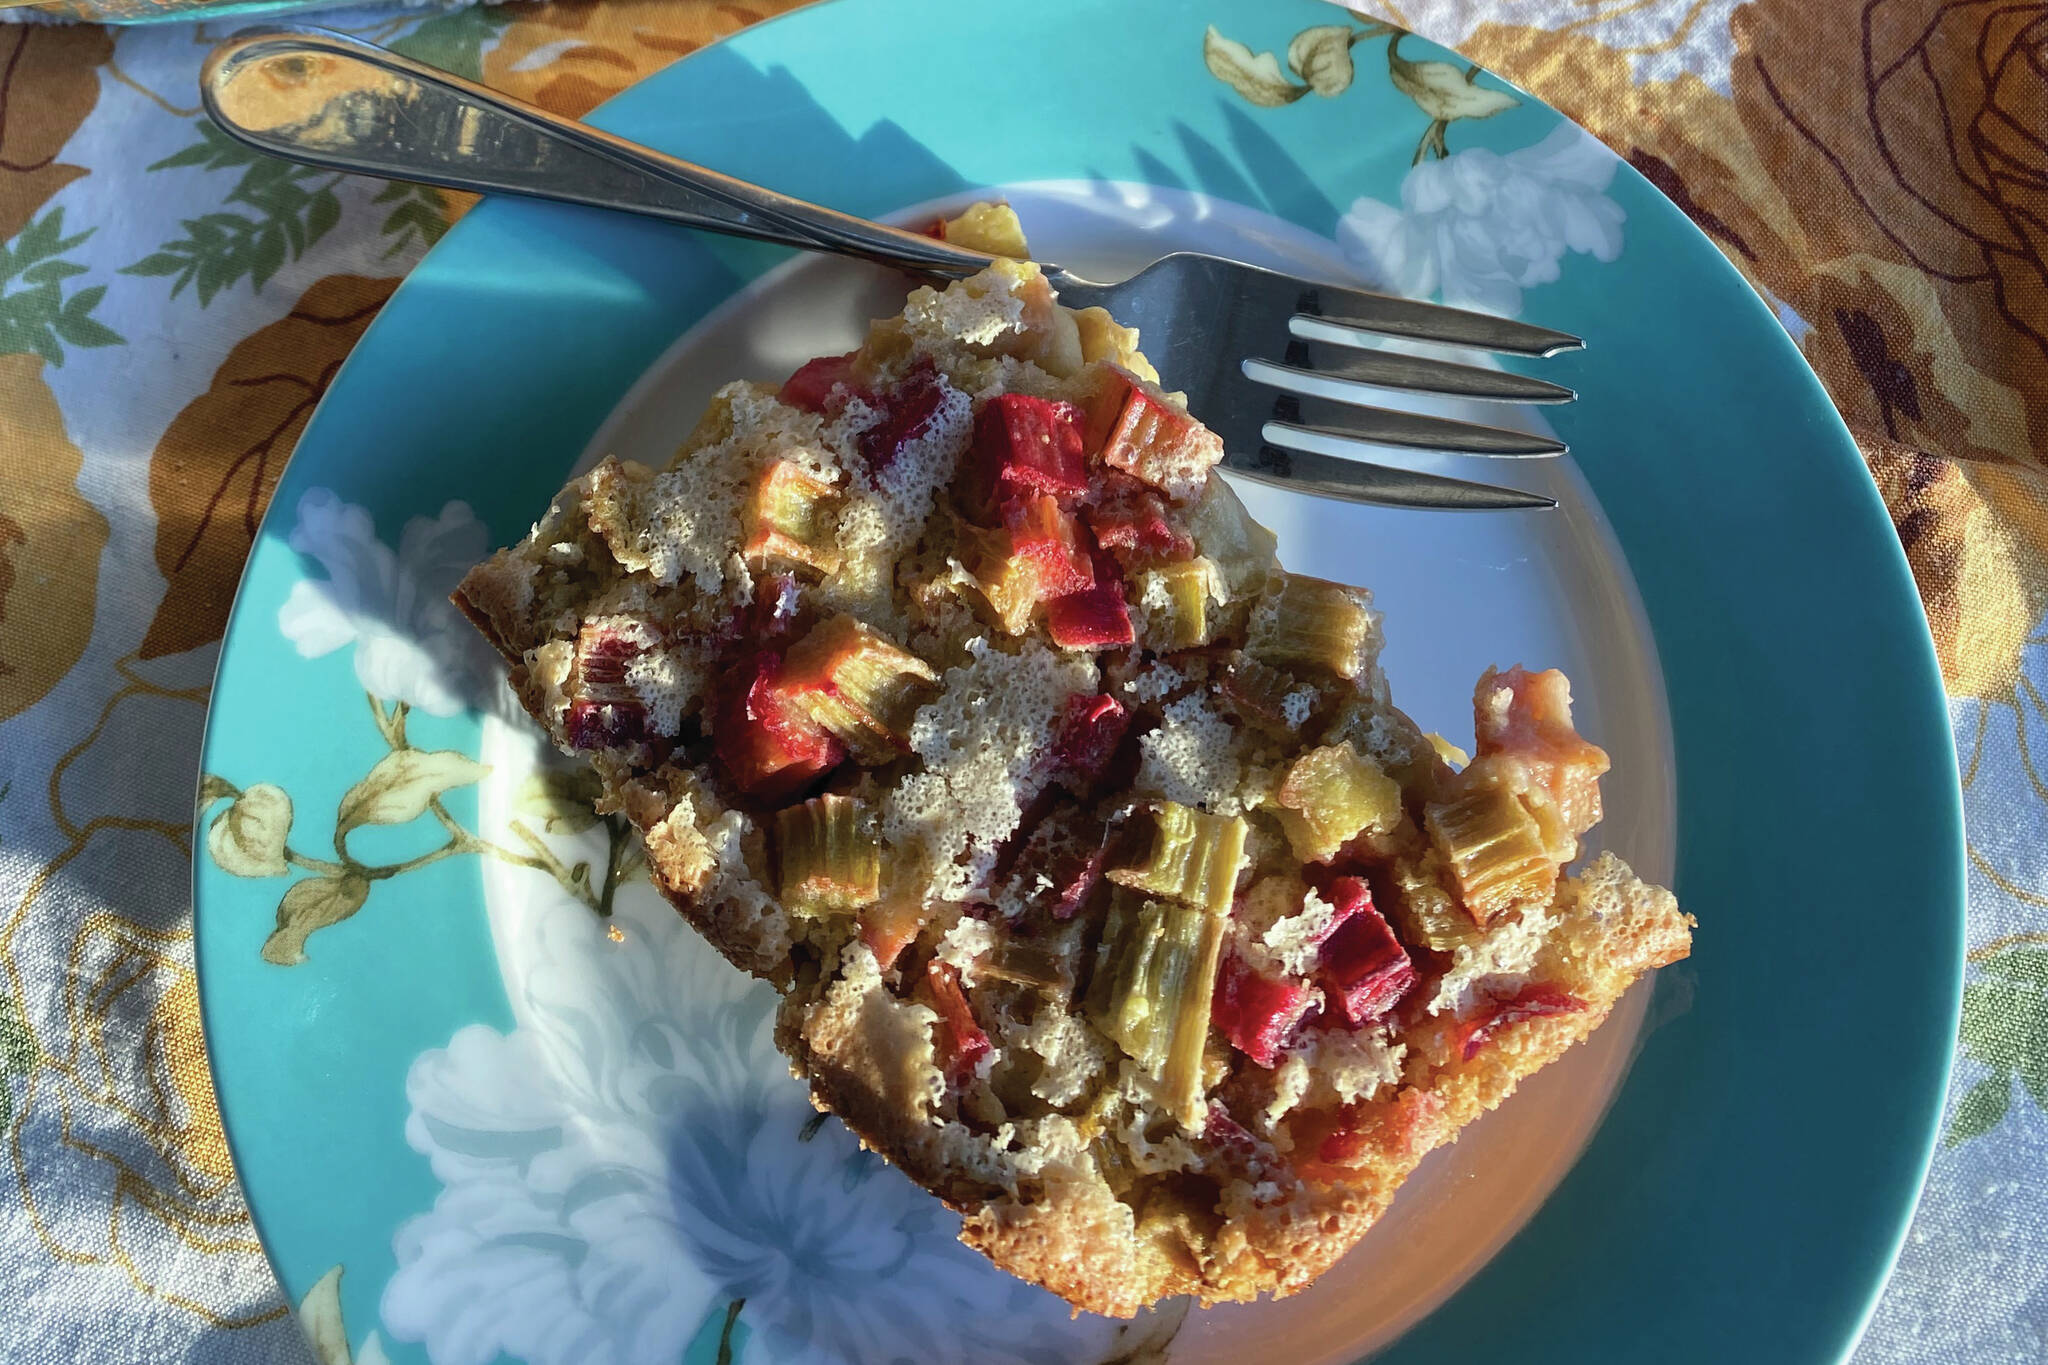 These rhubarb dream bars are equally sour and sweet and are delicious served cold or hot with a scoop of vanilla ice cream. (Photo by Tressa Dale/Peninsula Clarion)